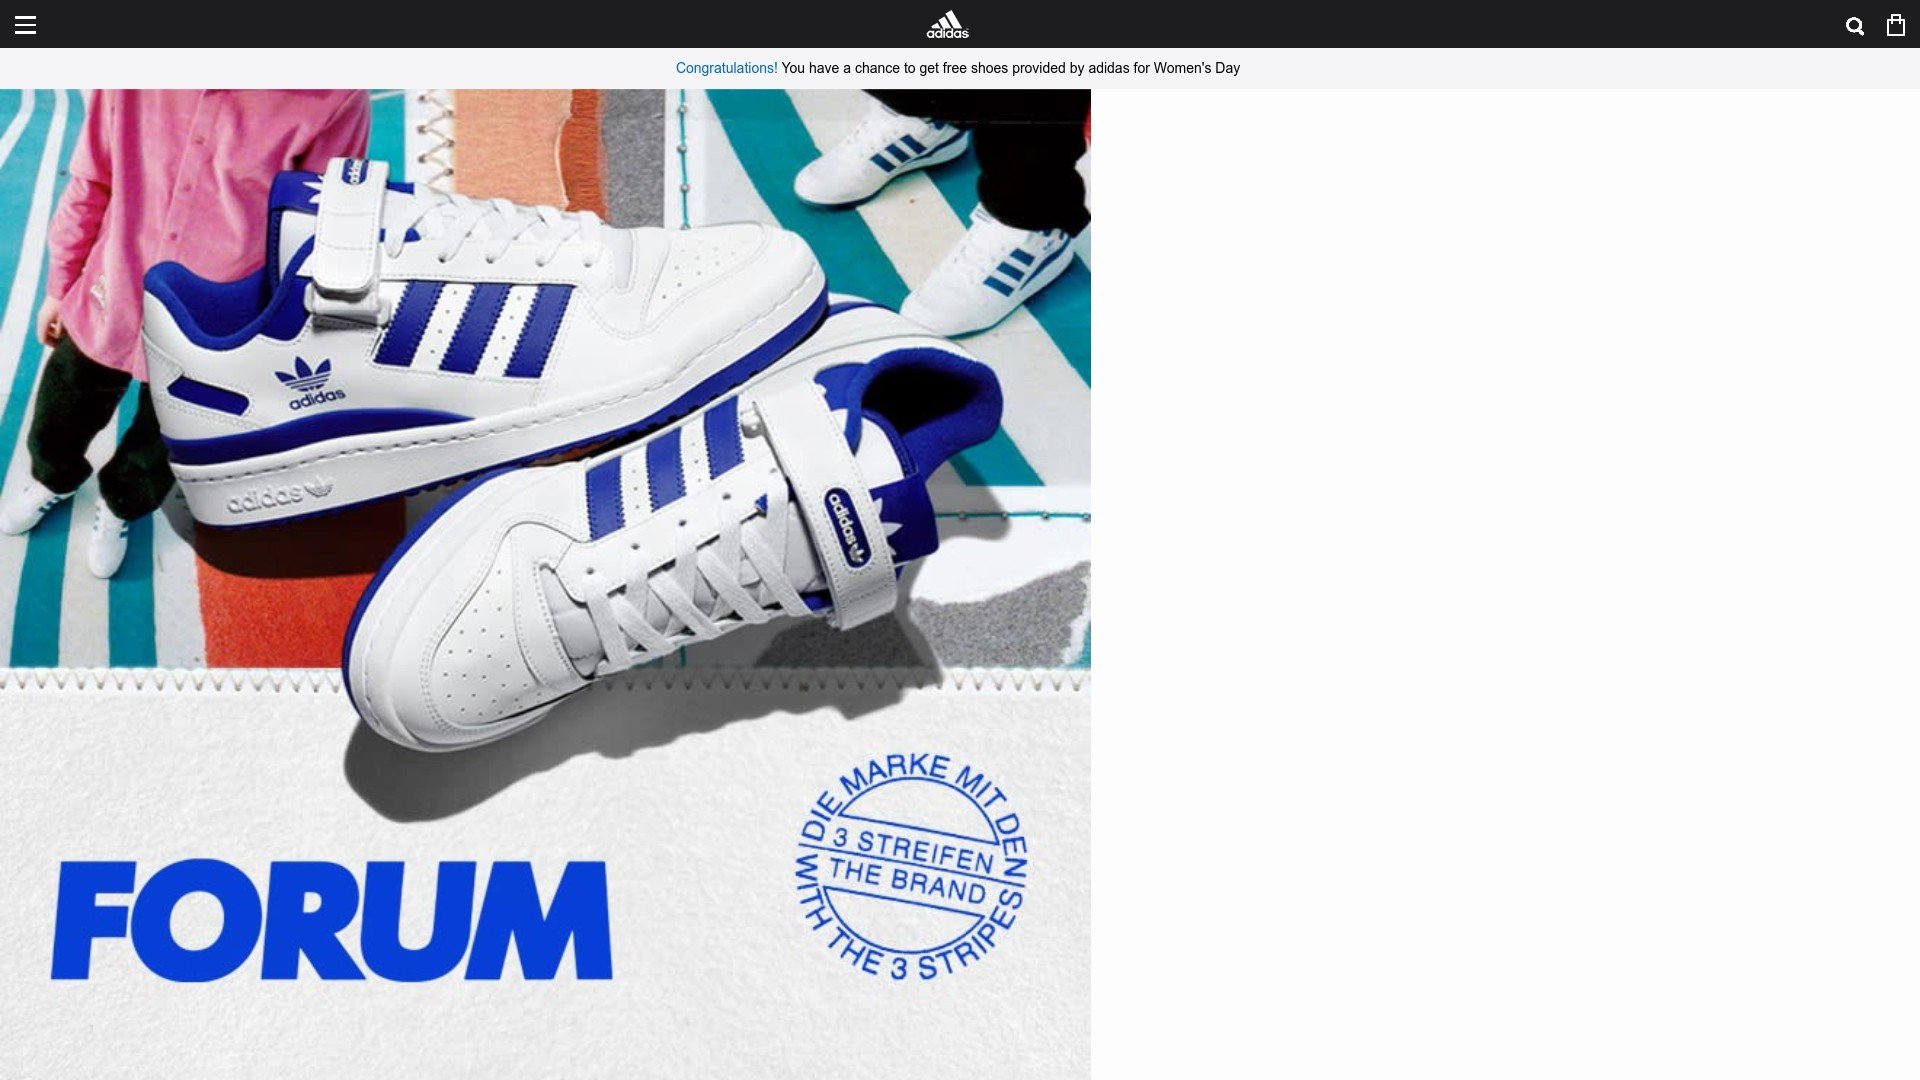 Adidas 70th Anniversary Celebration Gift Giveaway Scam